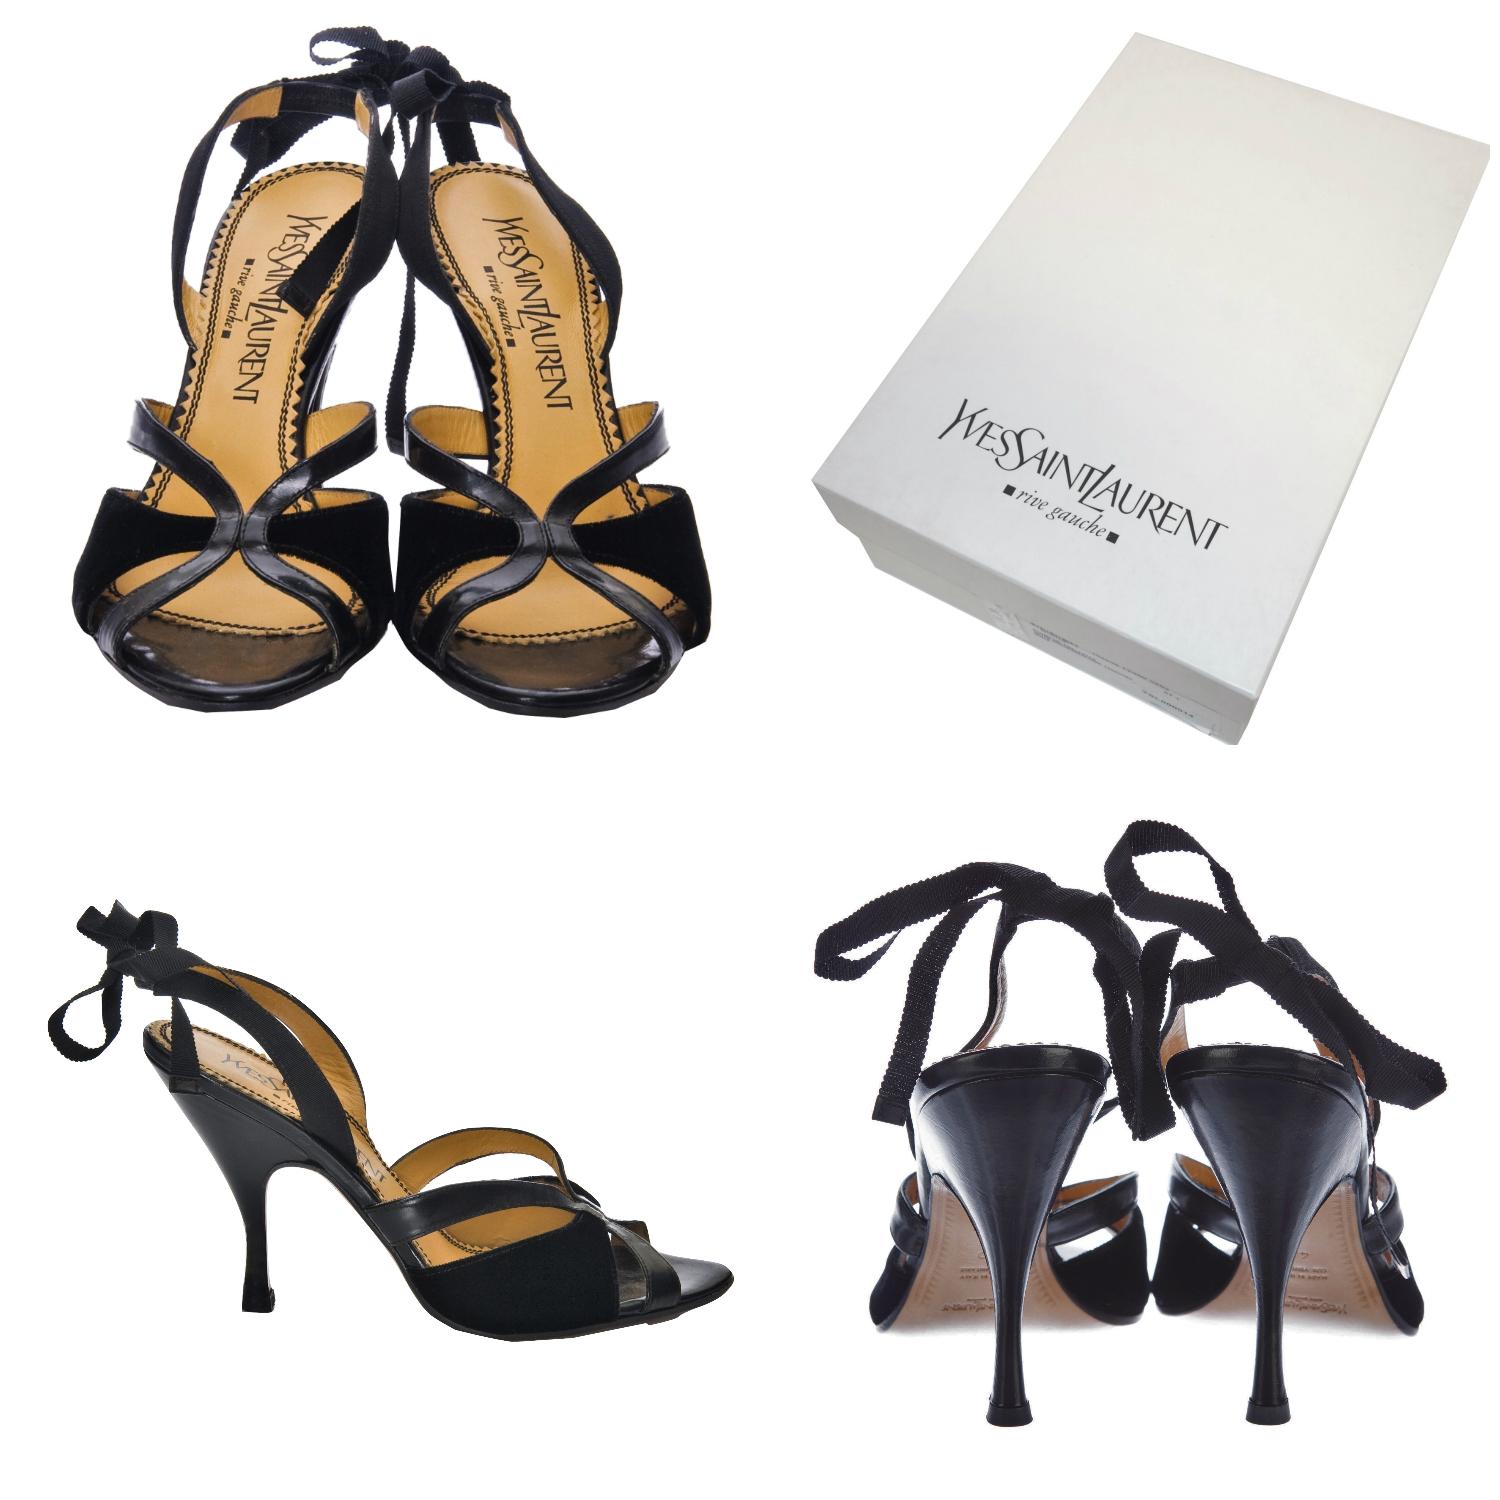 Tom Ford For YSL Heels
Brand New
* Stunning Black Leather & Velvet
* Tom Ford's Final Years w/ YSL
* Euro Size: 36.5 
* Ribbon Can be Tied Around Ankle or Accented at Back
* Leather Insole 
* Velvet & Leather Toe 
* 3.5